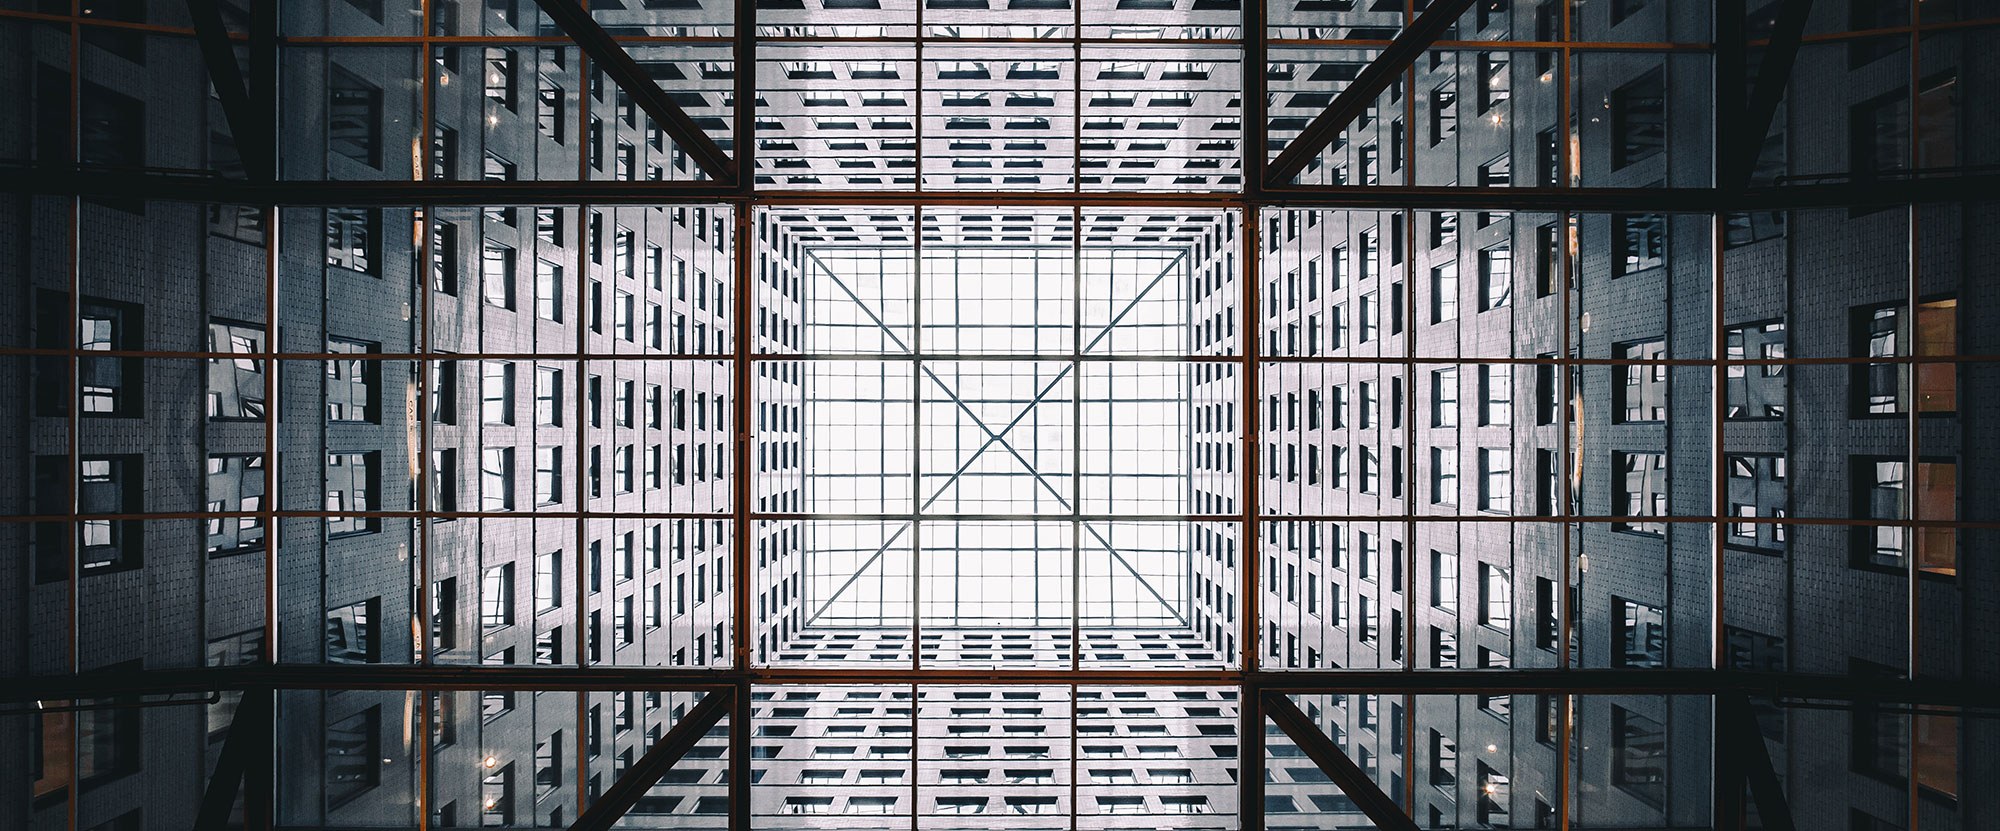 Abstract Image looking up in center of a complex of office buildings